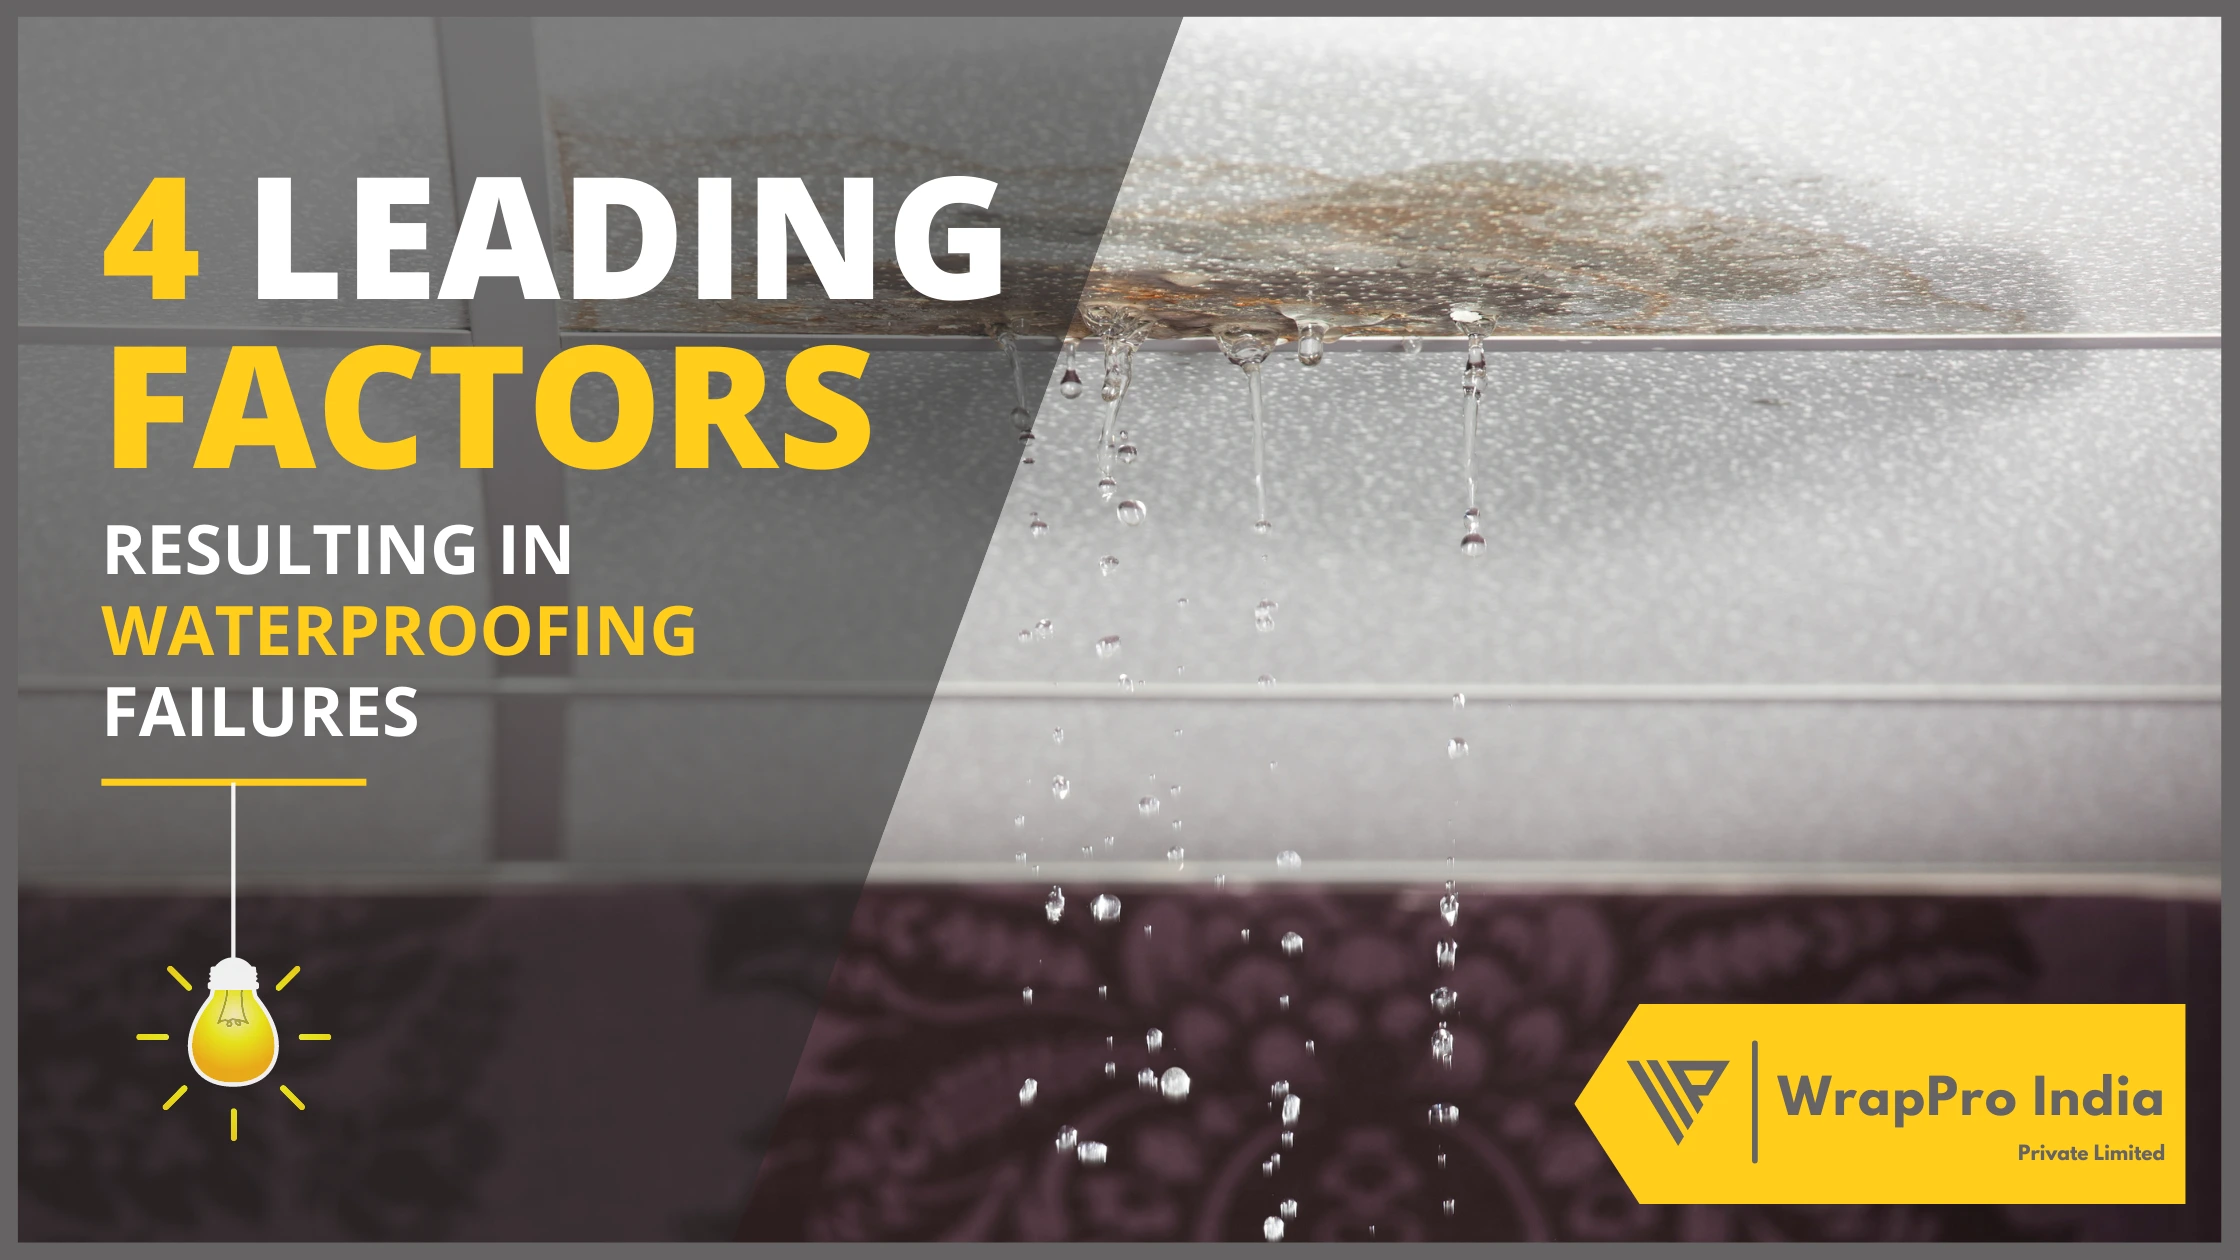 Leading Factors for Waterproofing Failures